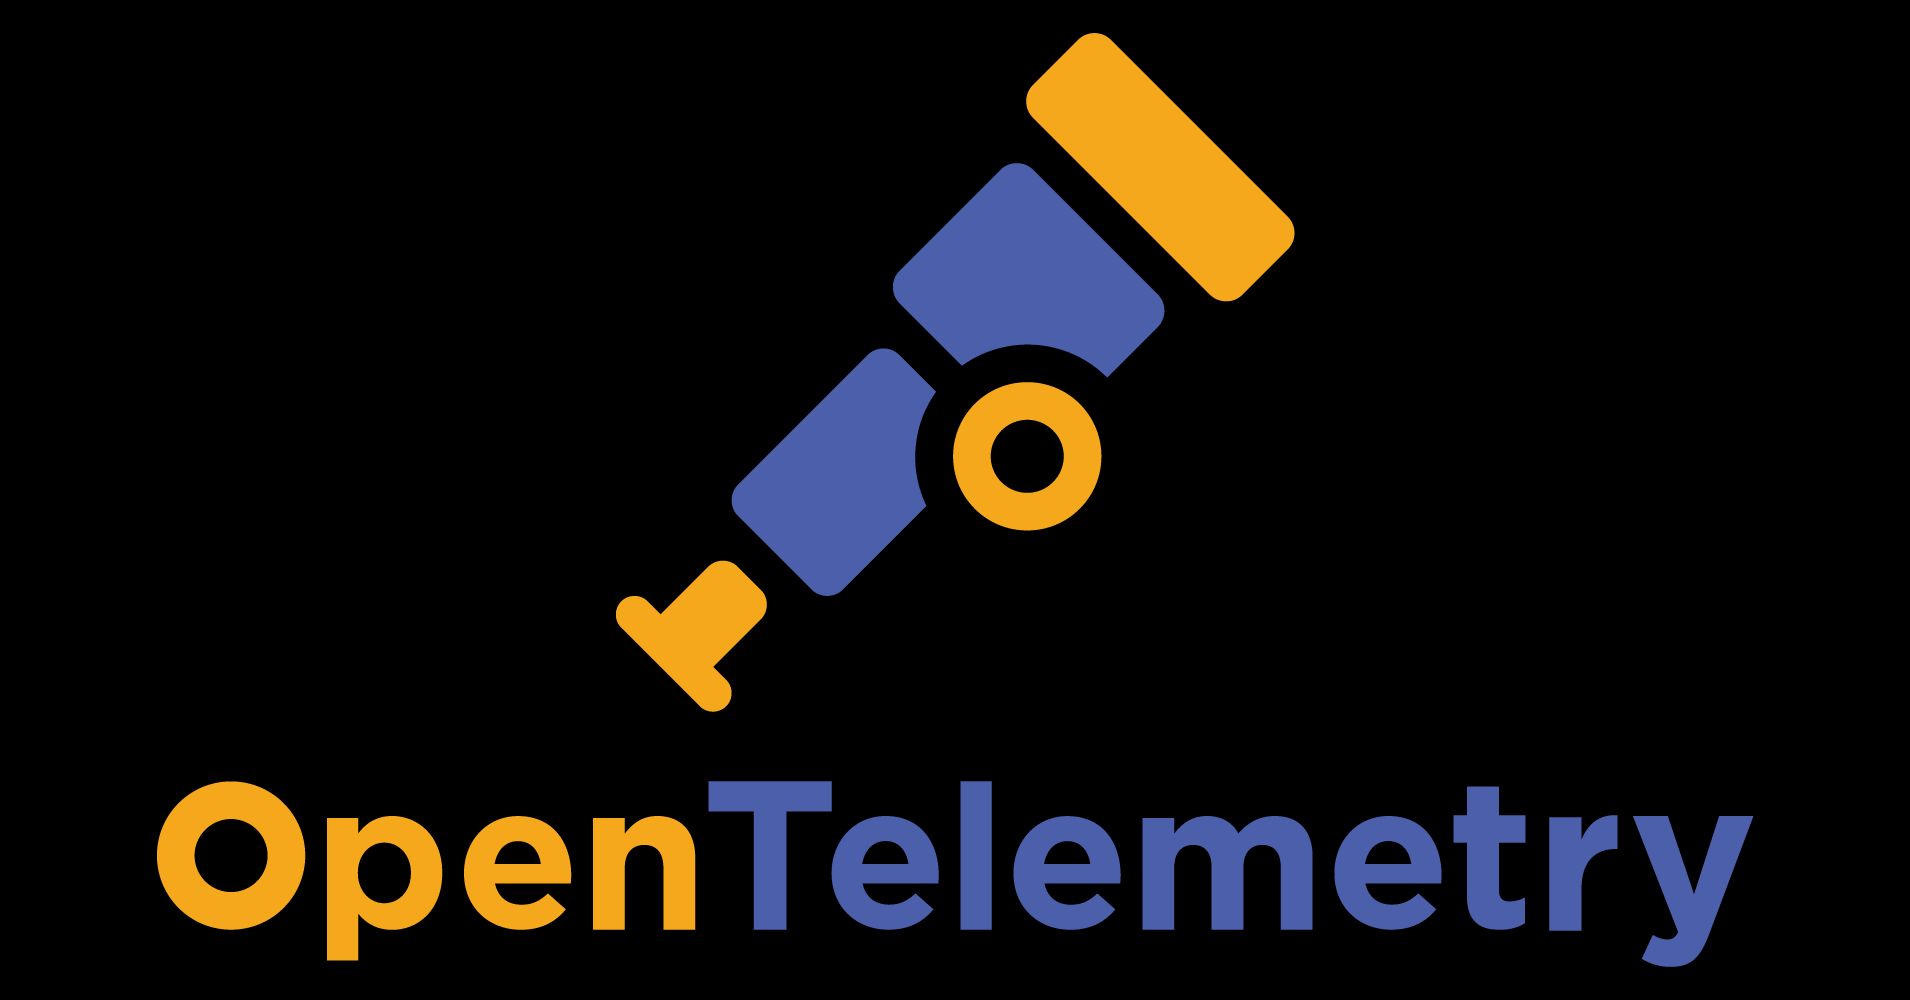 20-facts-about-opentelemetry